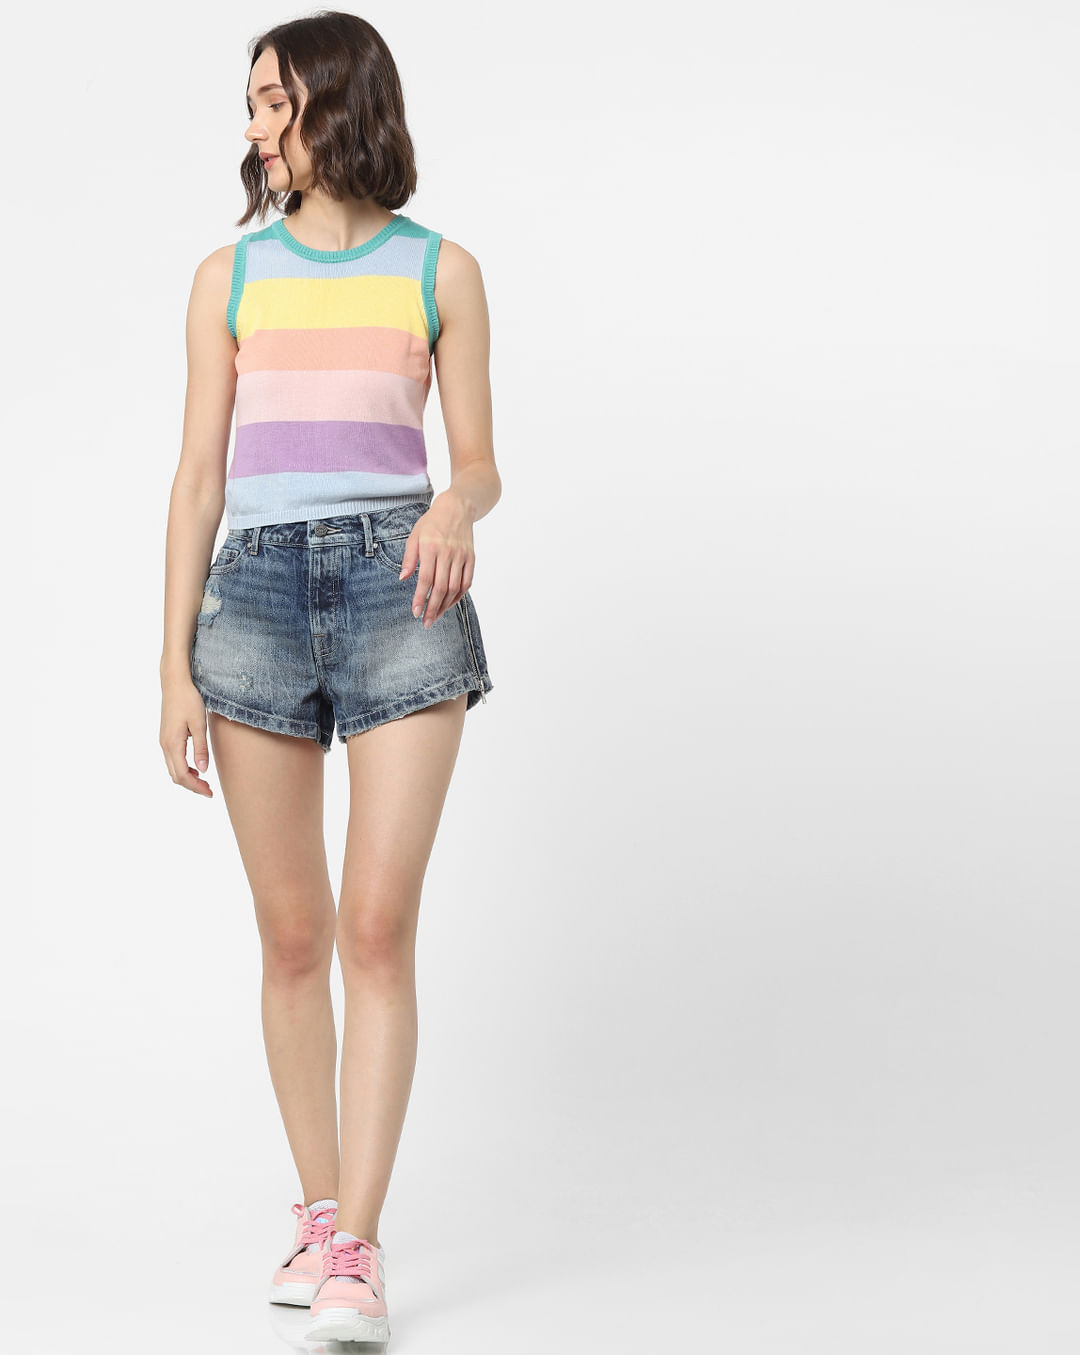 Buy Multi-coloured Striped Knit Top for Women, ONLY